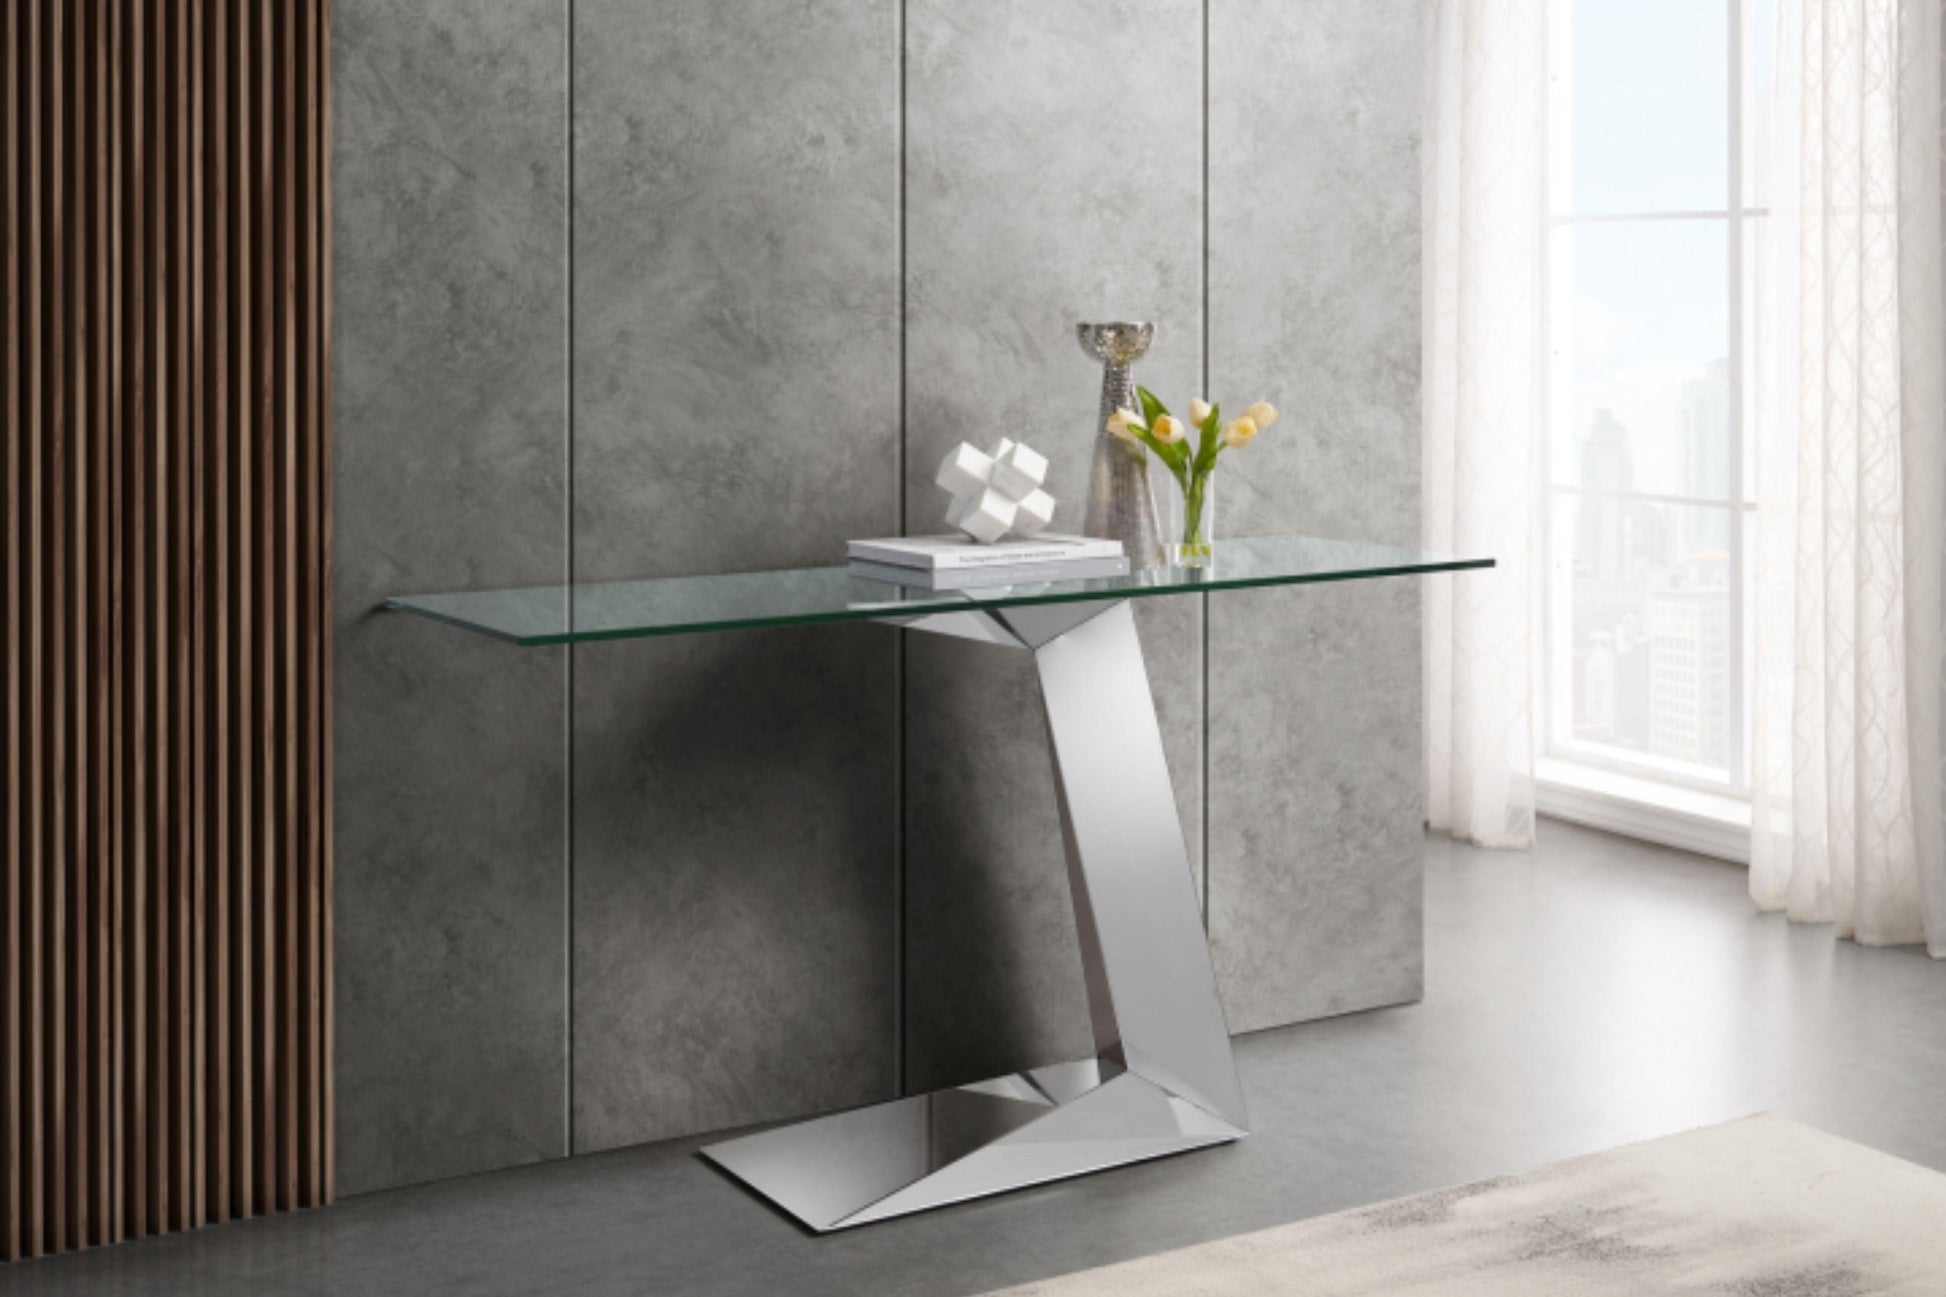 console table in clear bent glass